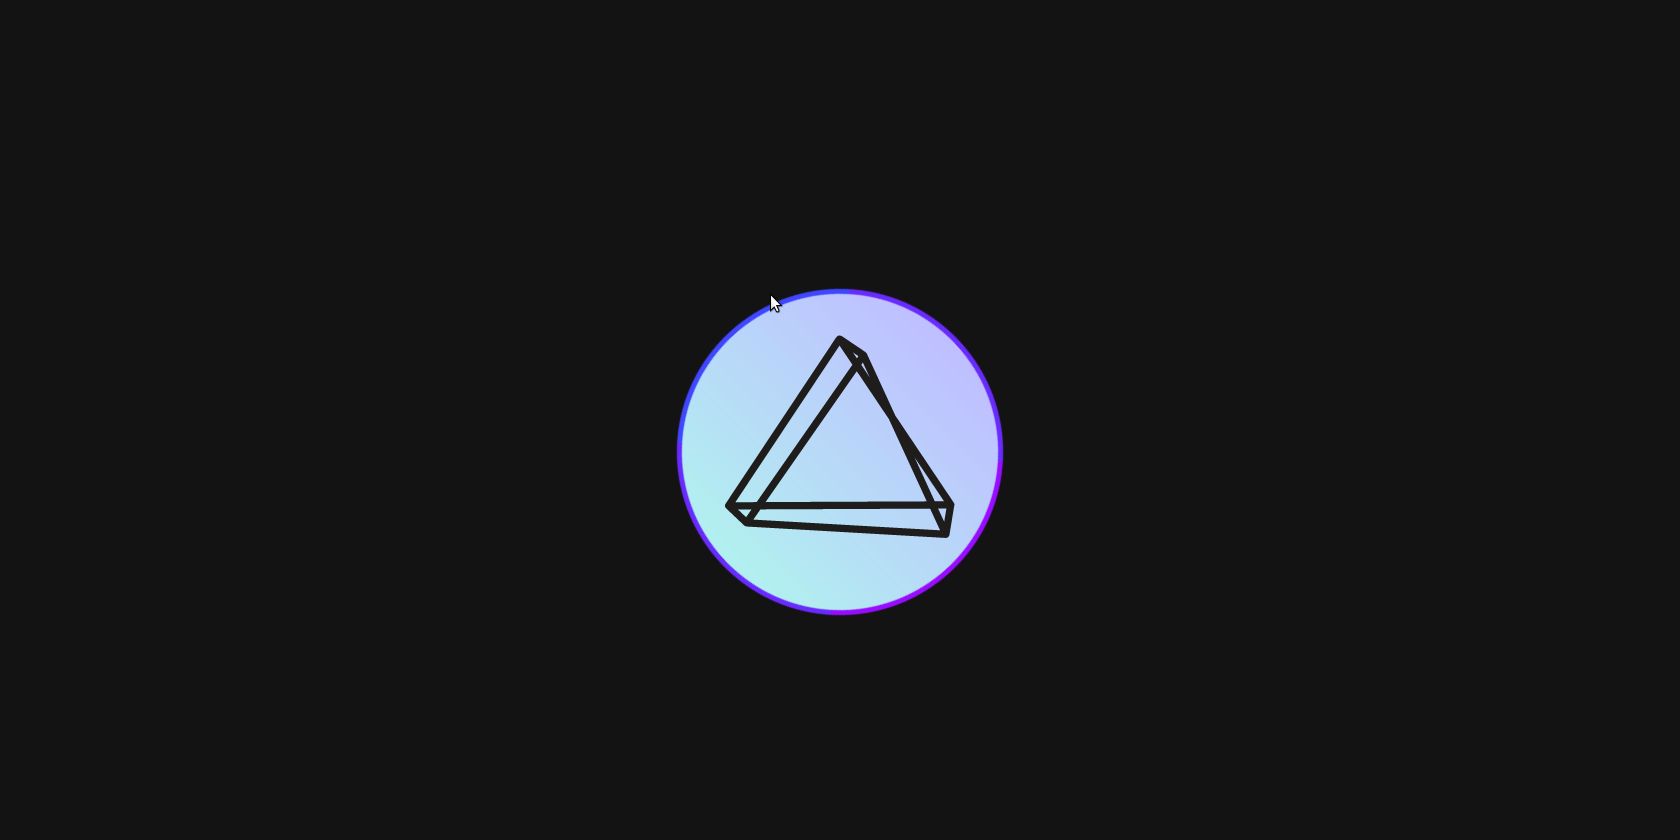 A triangle within a circle on a black background